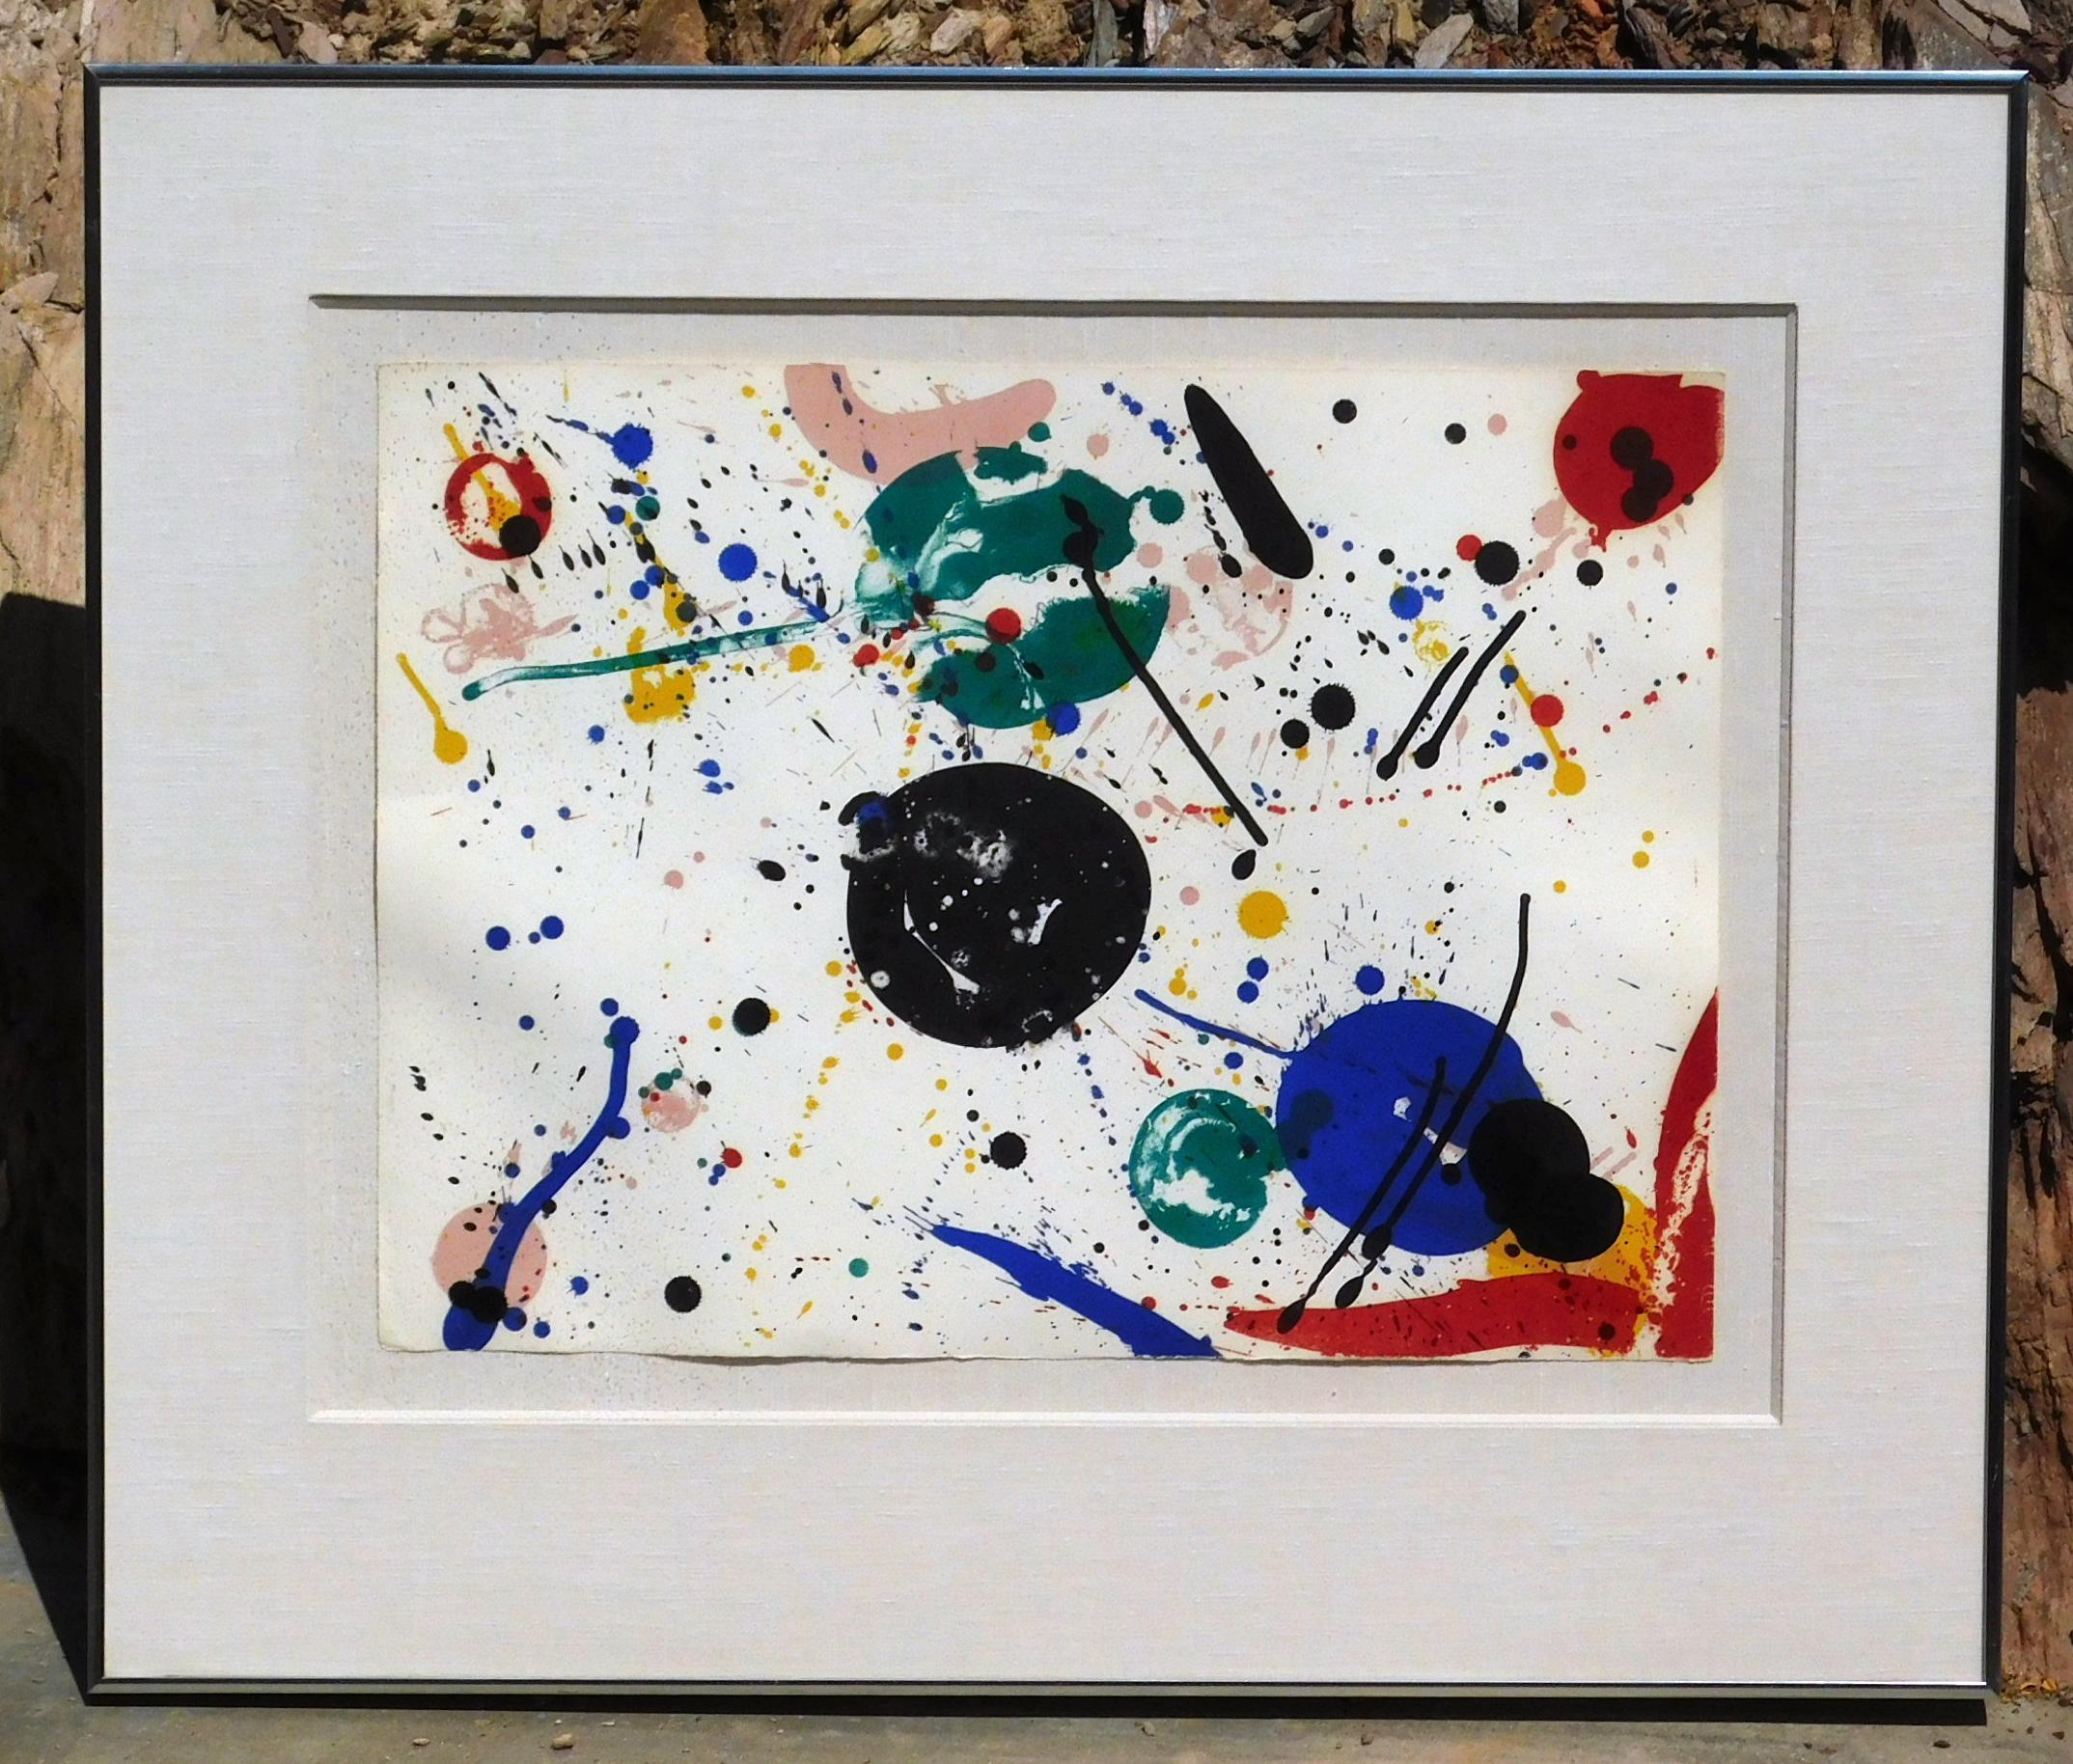 Paper Sam Francis Original Color Lithograph, 1965 - “Variant of Fifty” For Sale